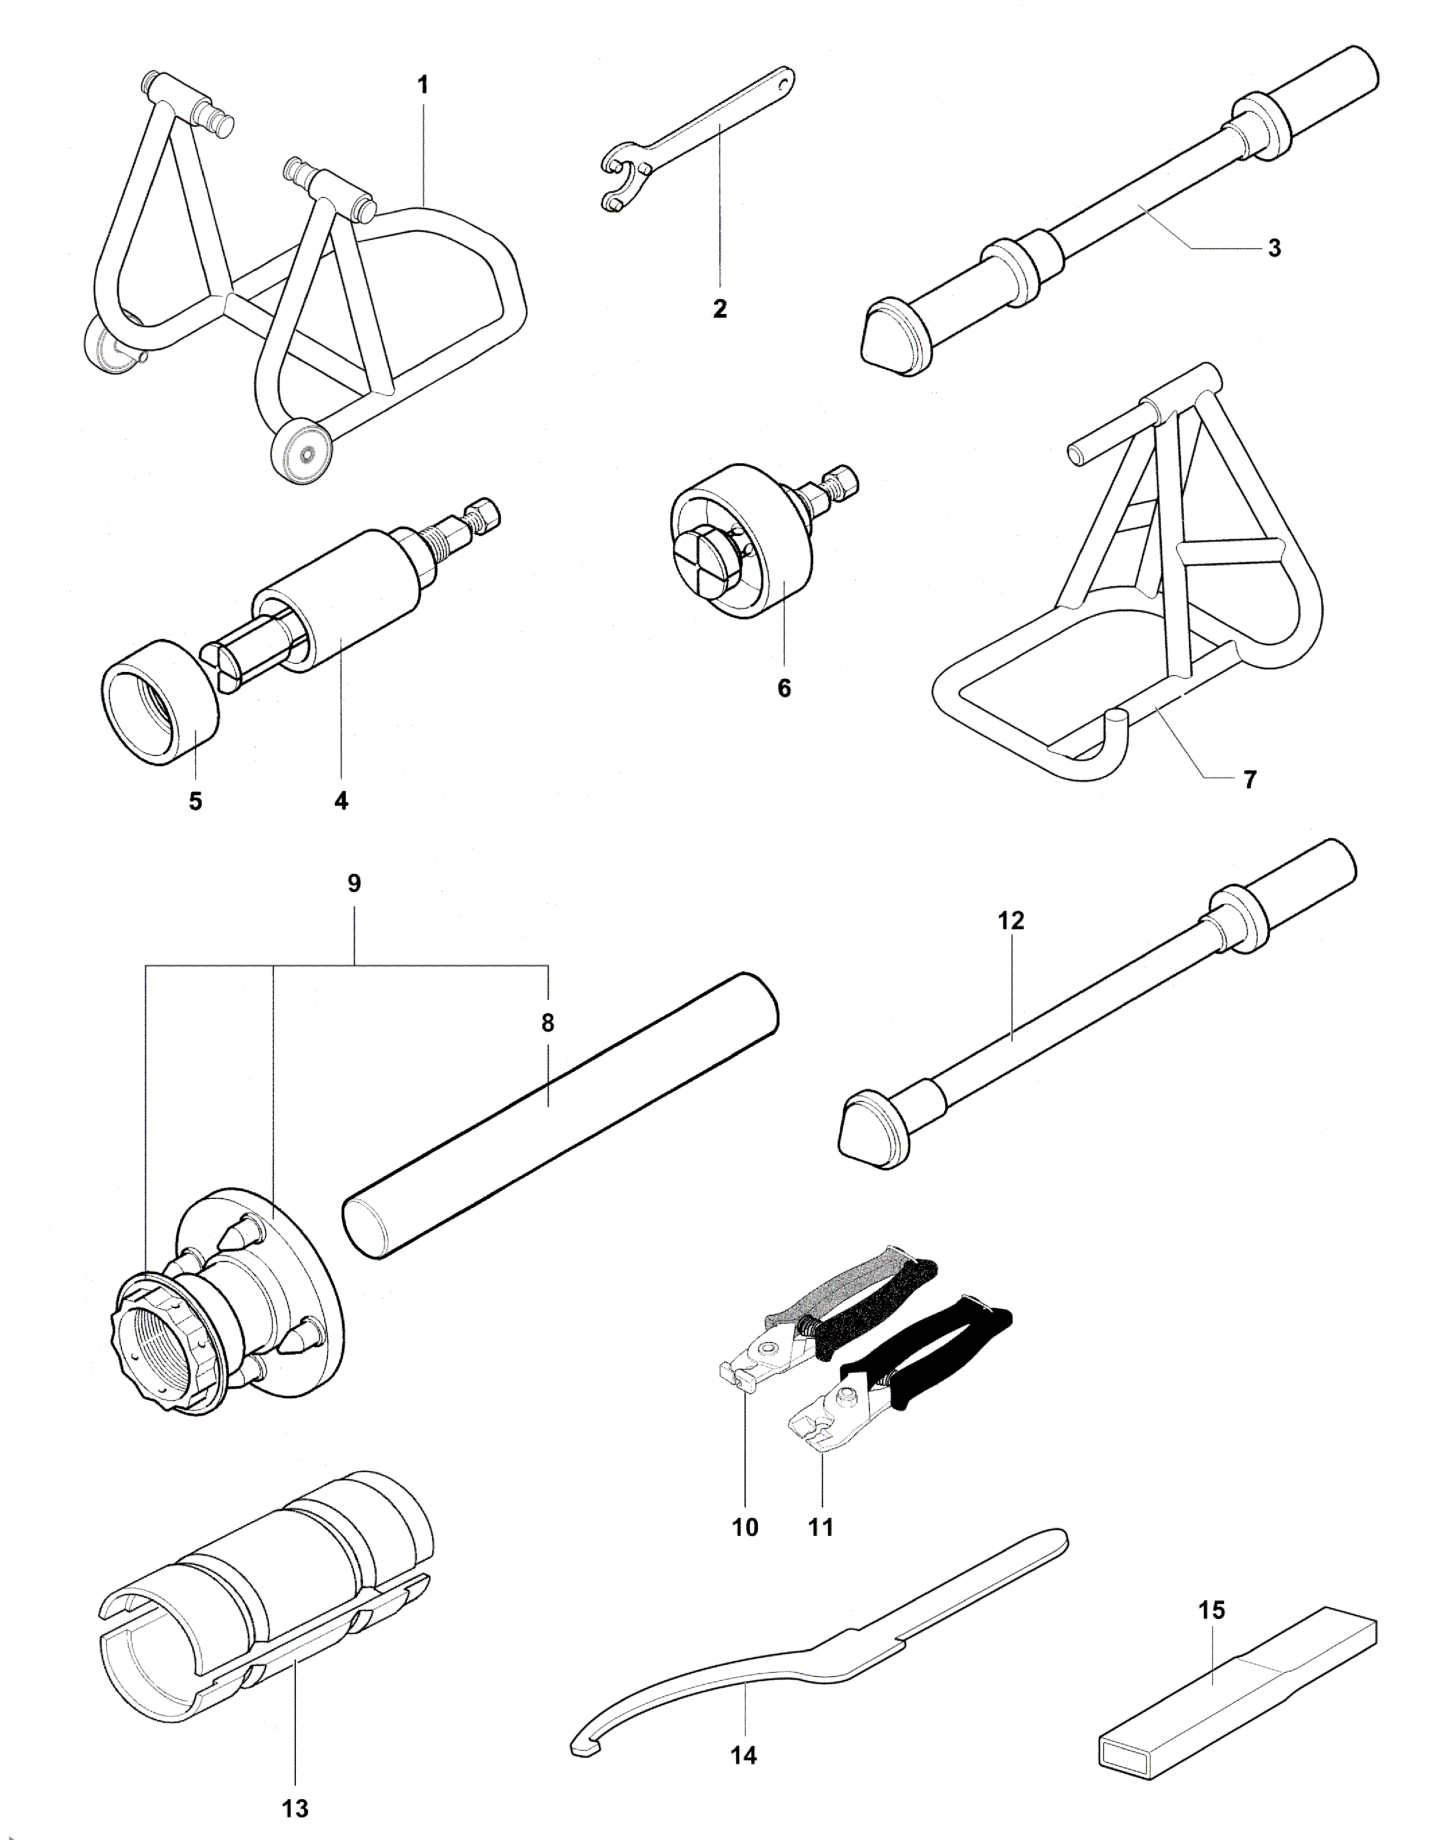 Service Tools Frame 1


